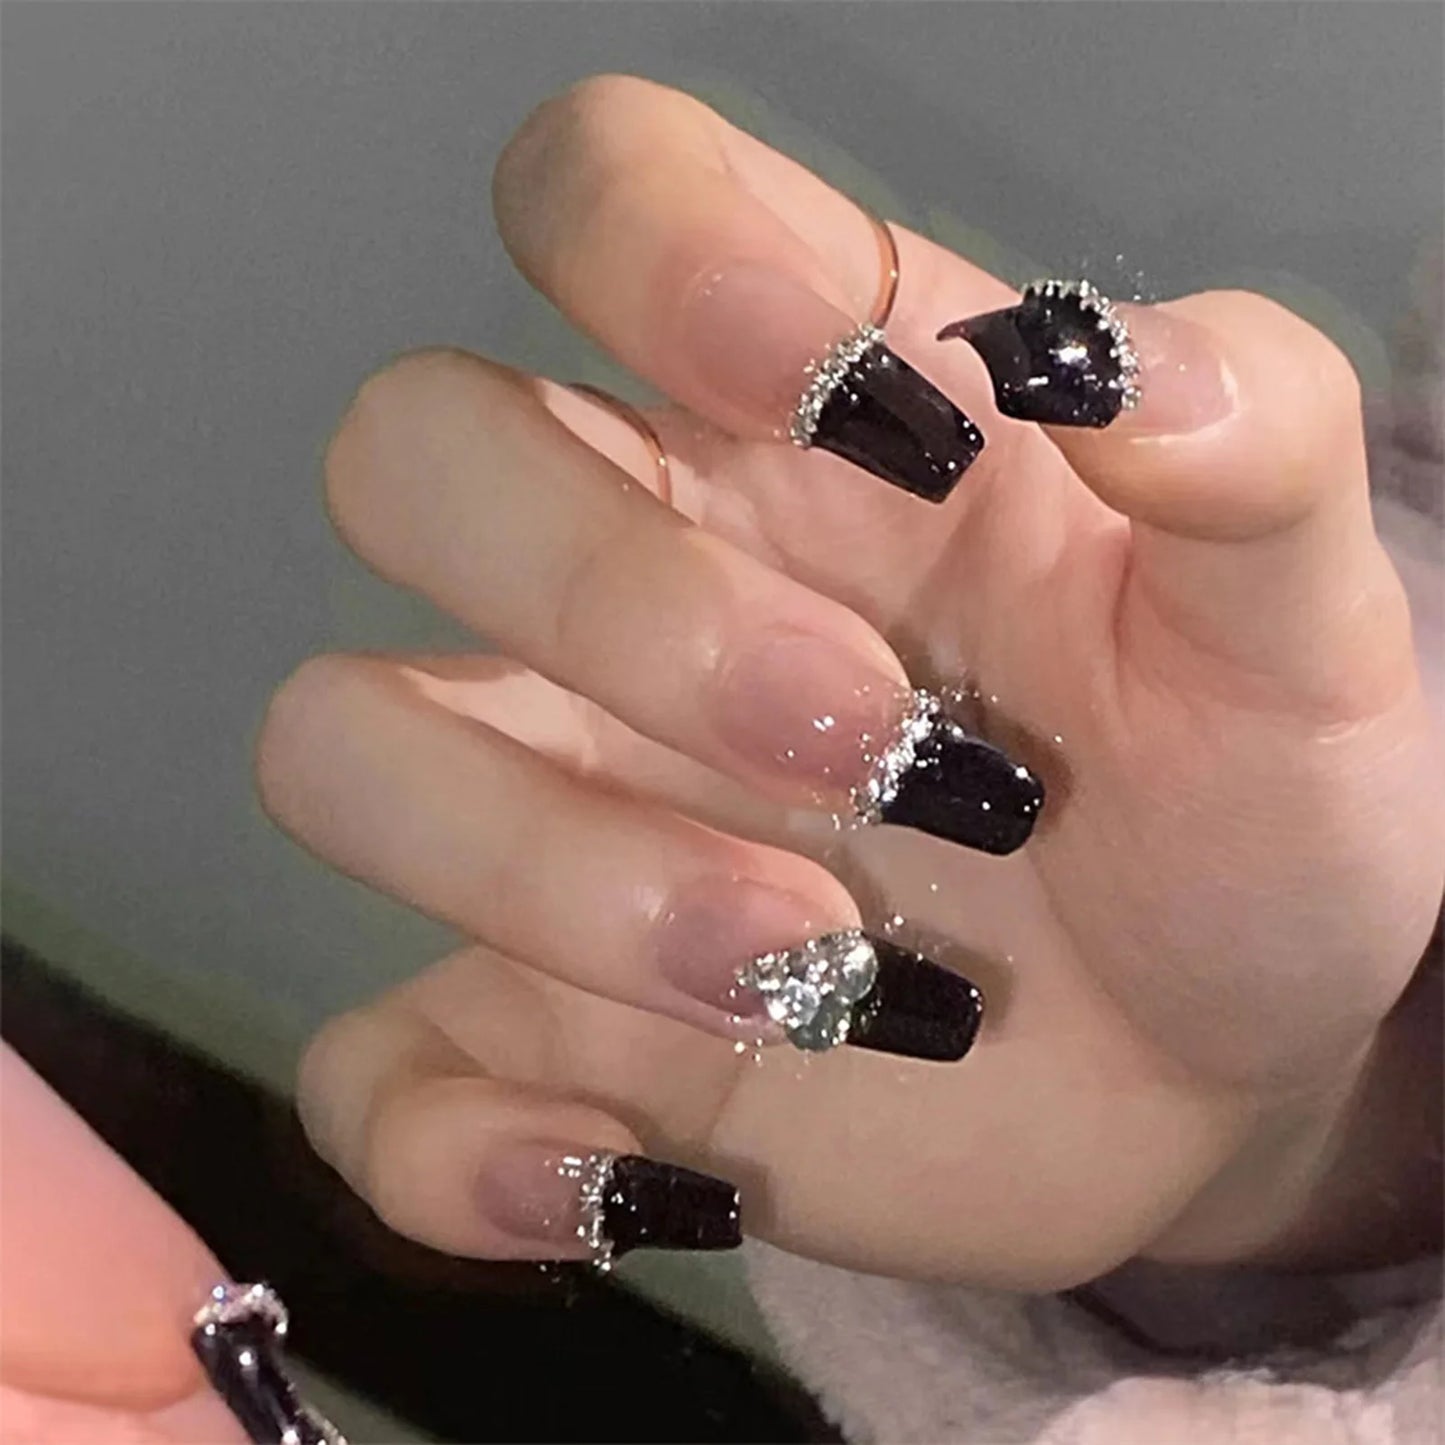 24Pcs Luxury Fake nail tips Women Wearable Press on Nails with Gold Glitter Diamond Full Cover Coffin Artificial Nails Tips